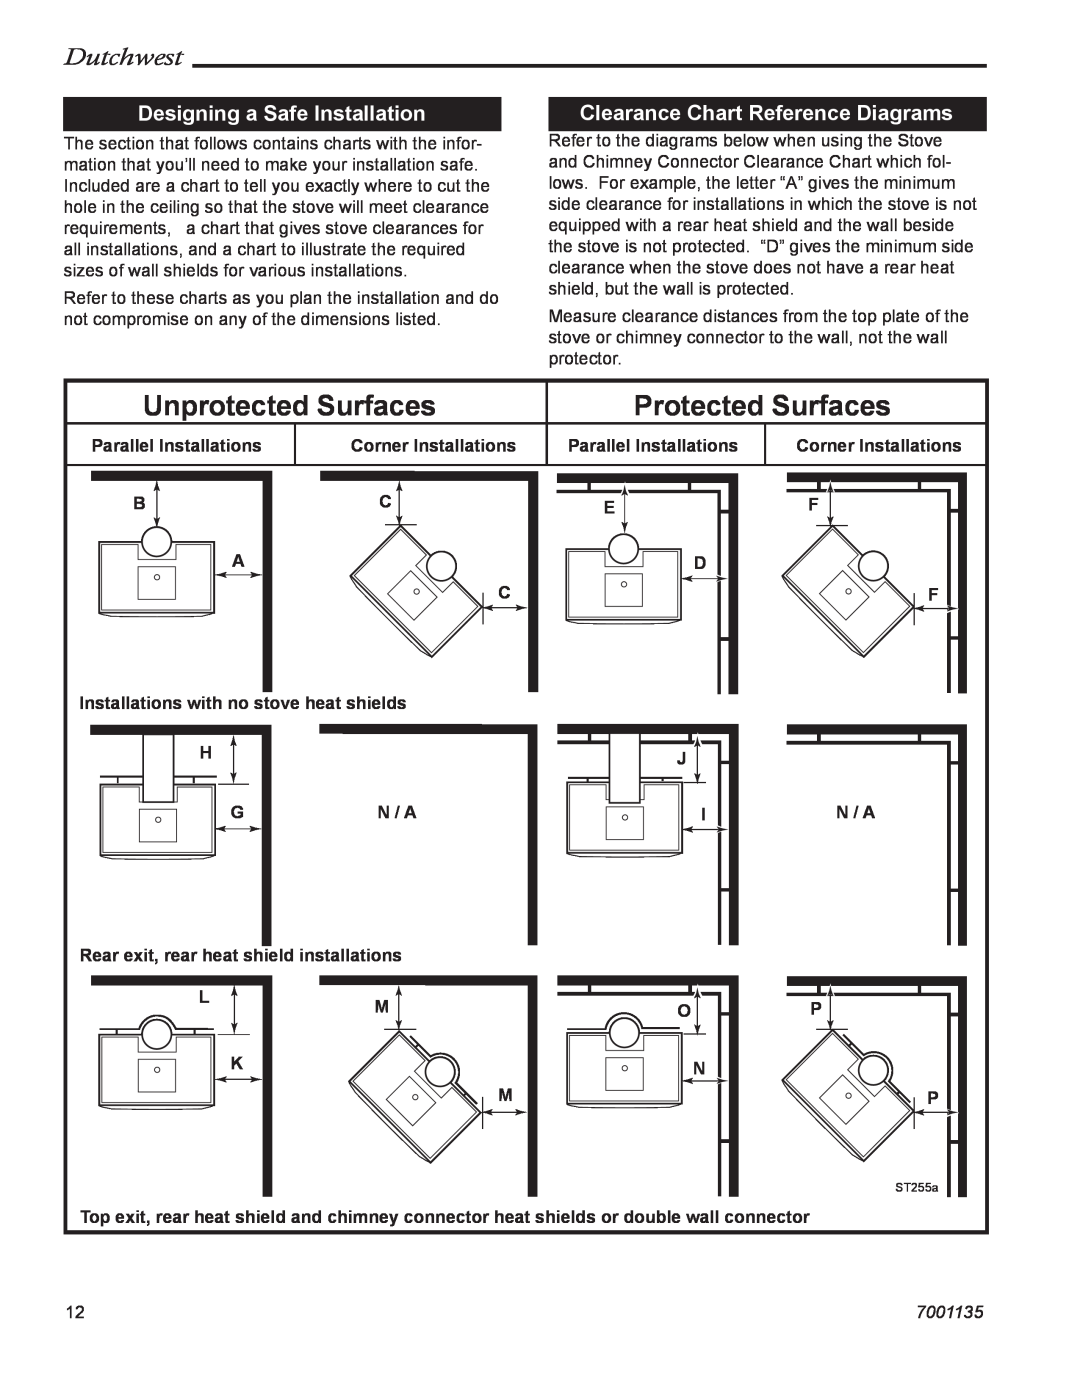 Vermont Casting 2461 Designing a Safe Installation, Clearance Chart Reference Diagrams, Unprotected Surfaces, Dutchwest 